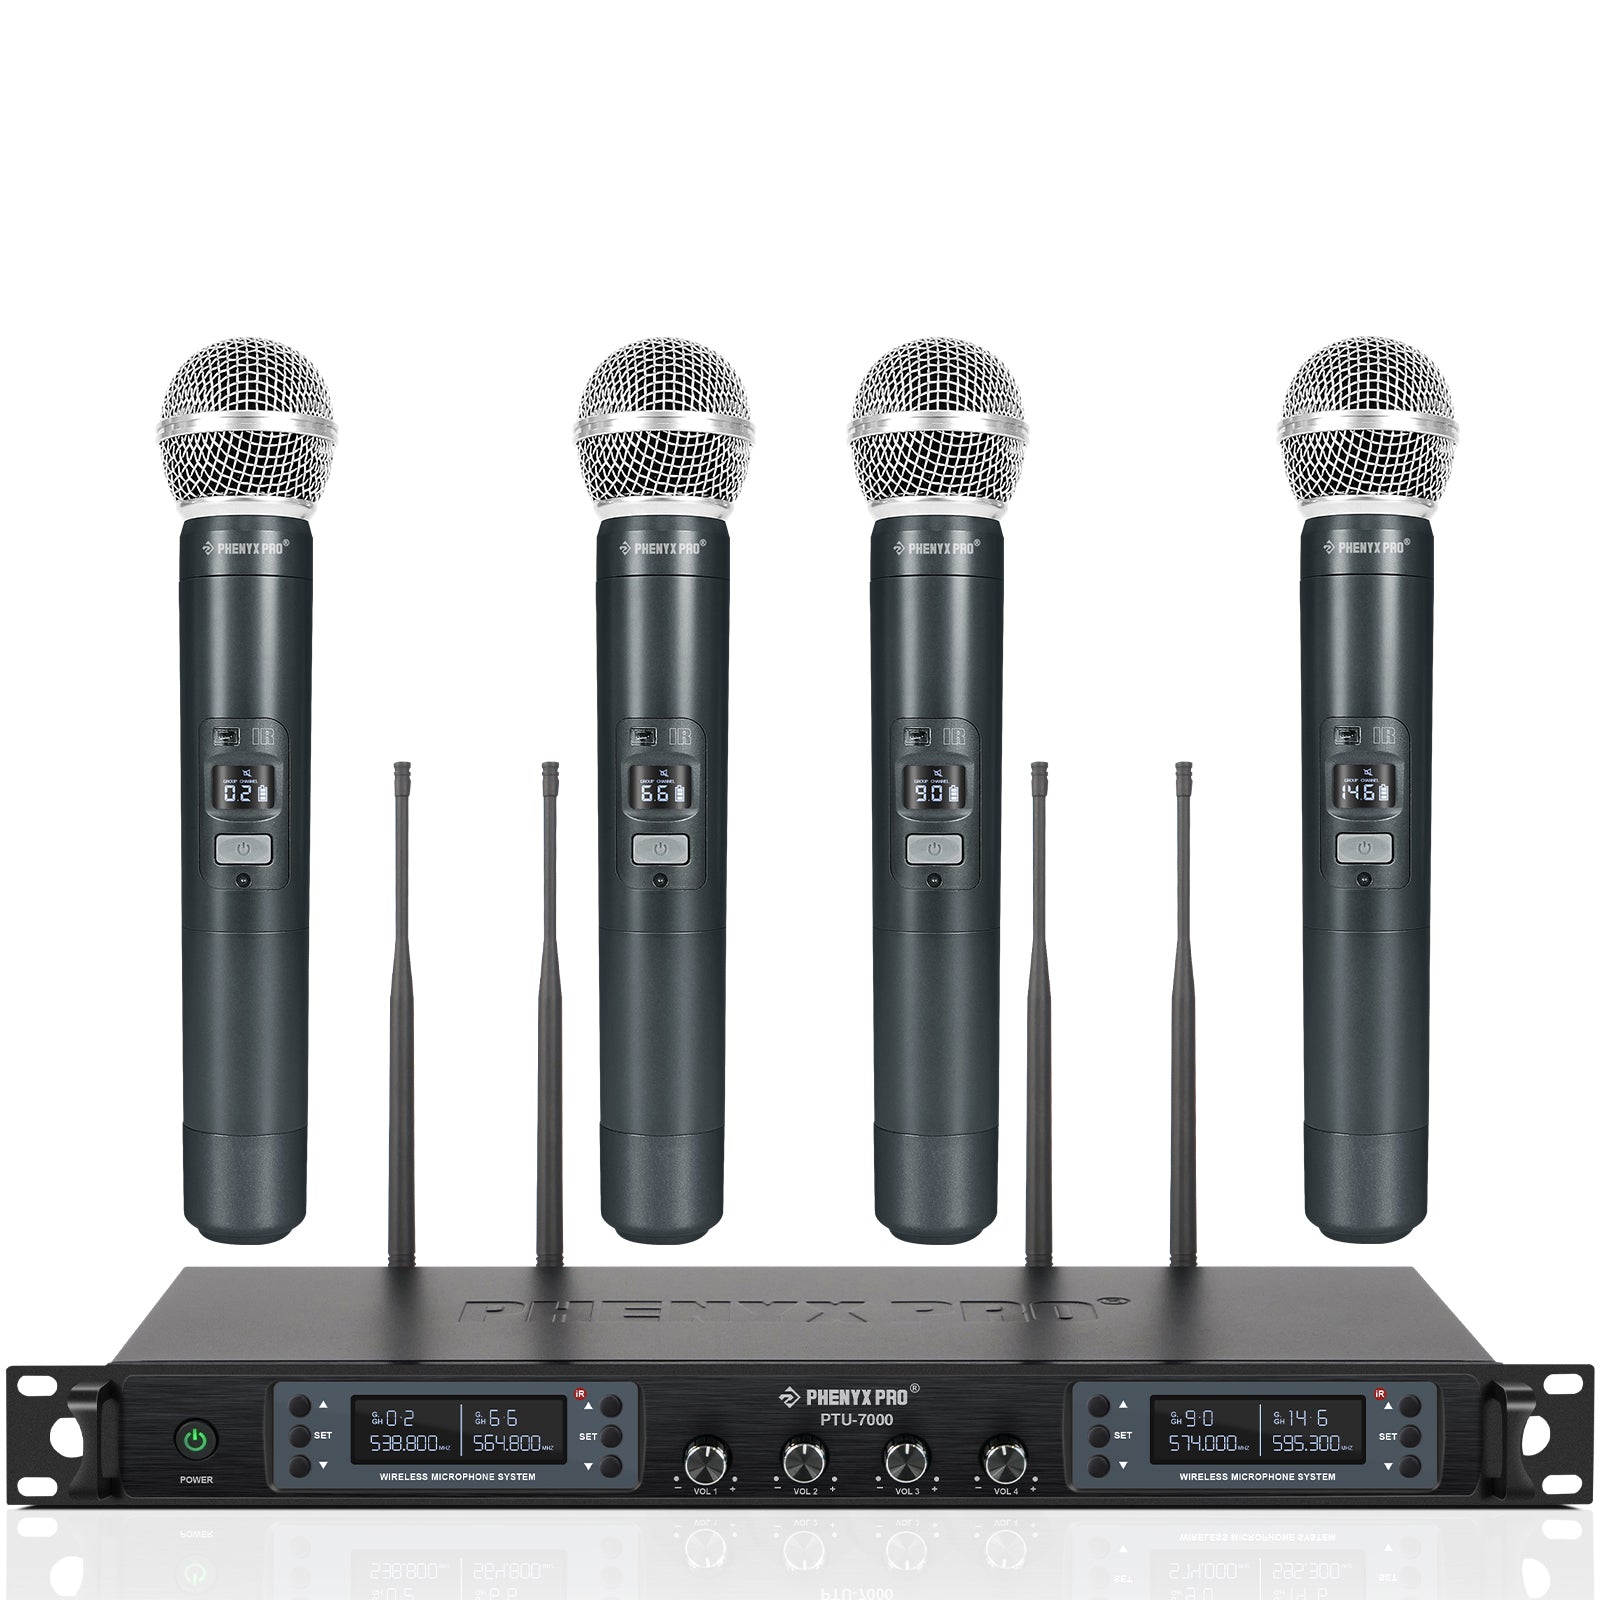 300　Ideal　mics　Church,　Handheld　for　Audio　Range　ft,　Microphone　to　GTD　up　System,　Karaoke,　Wireless　Party,　Cordless　Dj